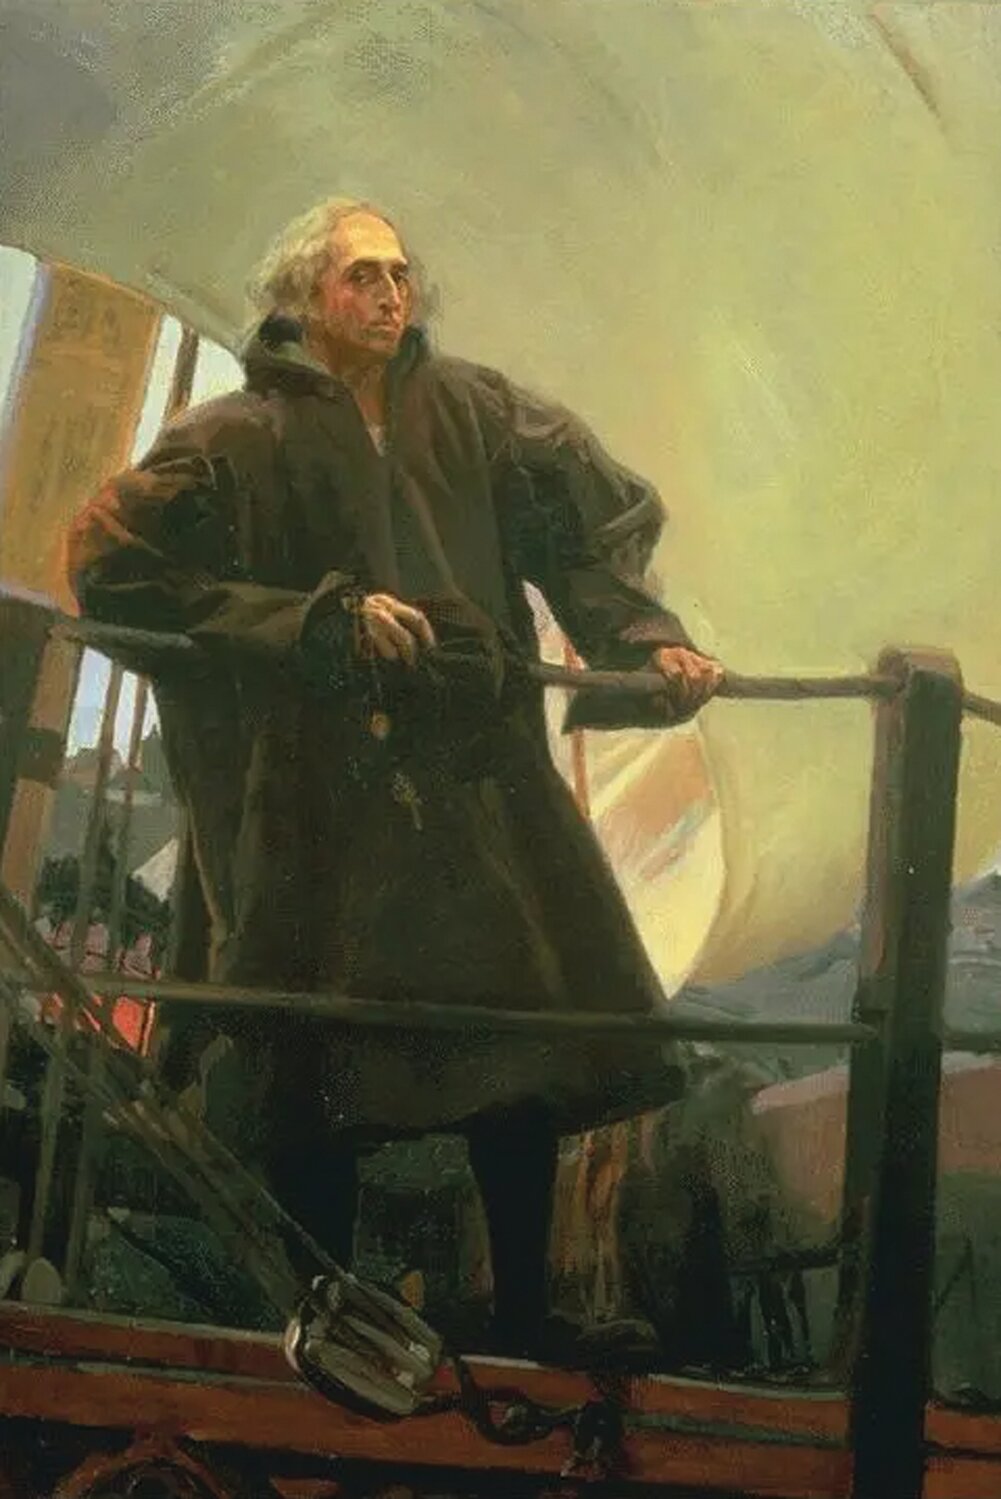 THE EXPLORER: This painting, “Christopher Columbus Leaving Palos, Spain, Aboard the Santa Maria on His First Voyage,” circa 1910, by Joaquin Sorolla y Bastida, is on display at The Mariners’ Museum in Virginia. (File photo)